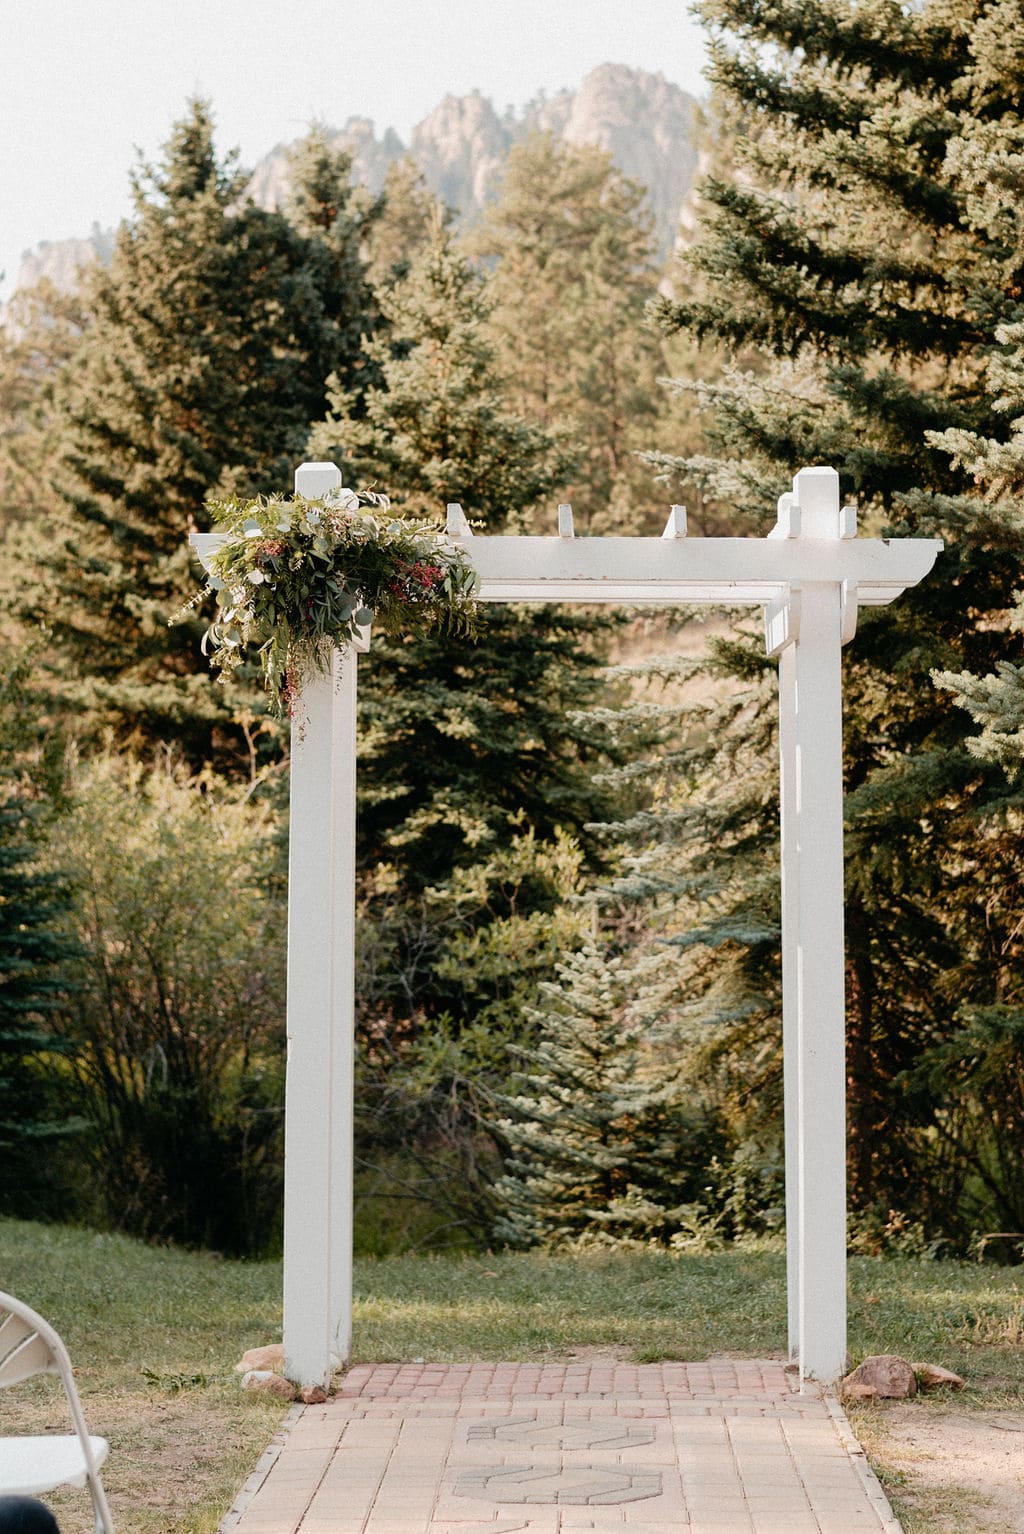 Ceremony Site at Wedgewood Mountain View Ranch